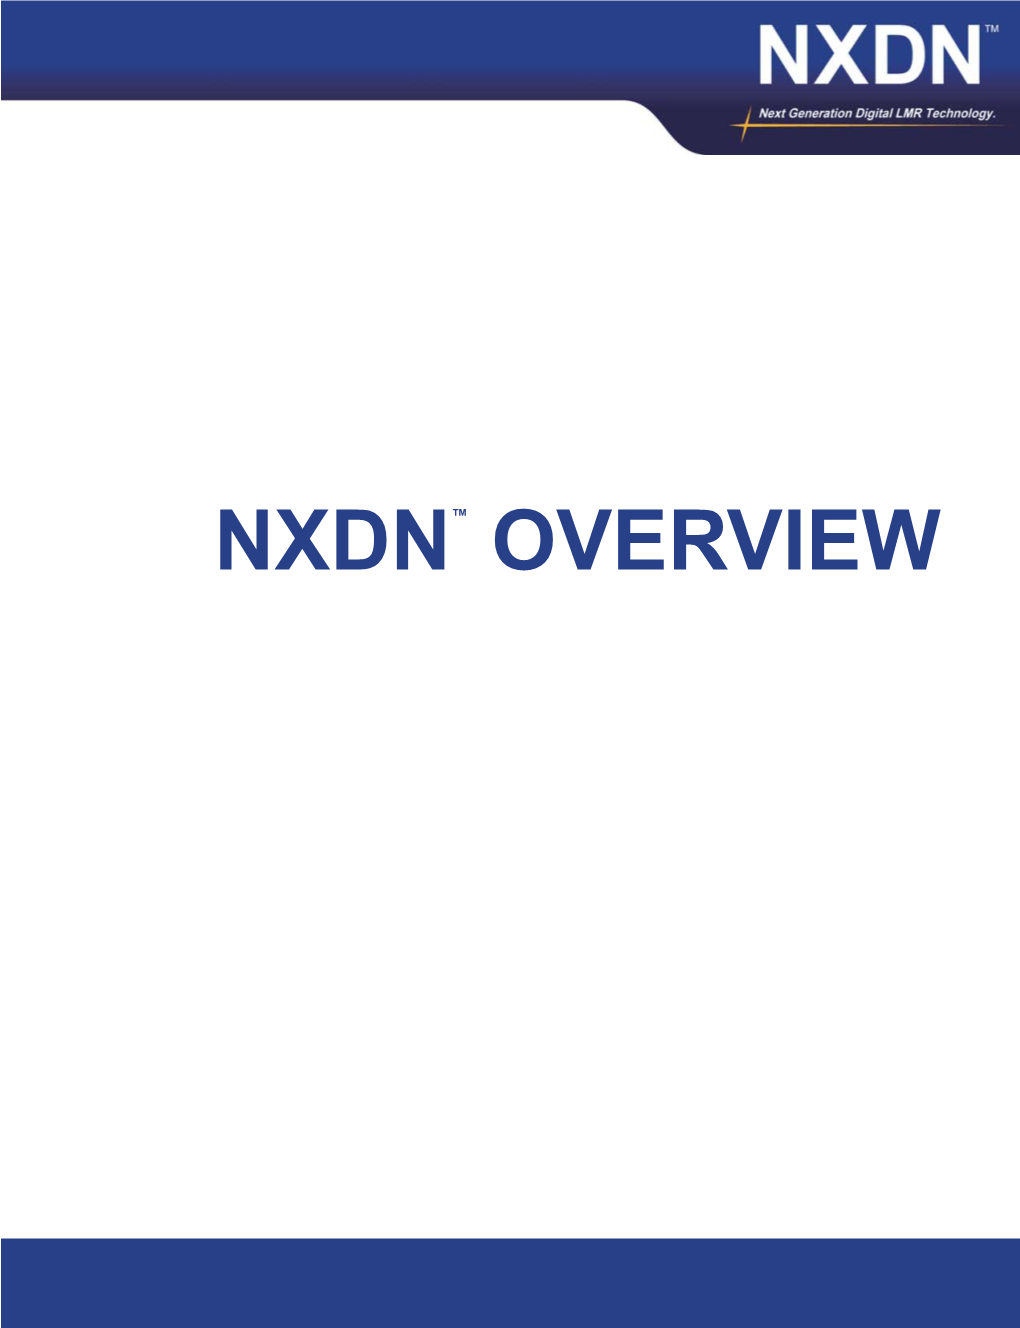 NXDN™ OVERVIEW NXDN™ OVERVIEW Rev